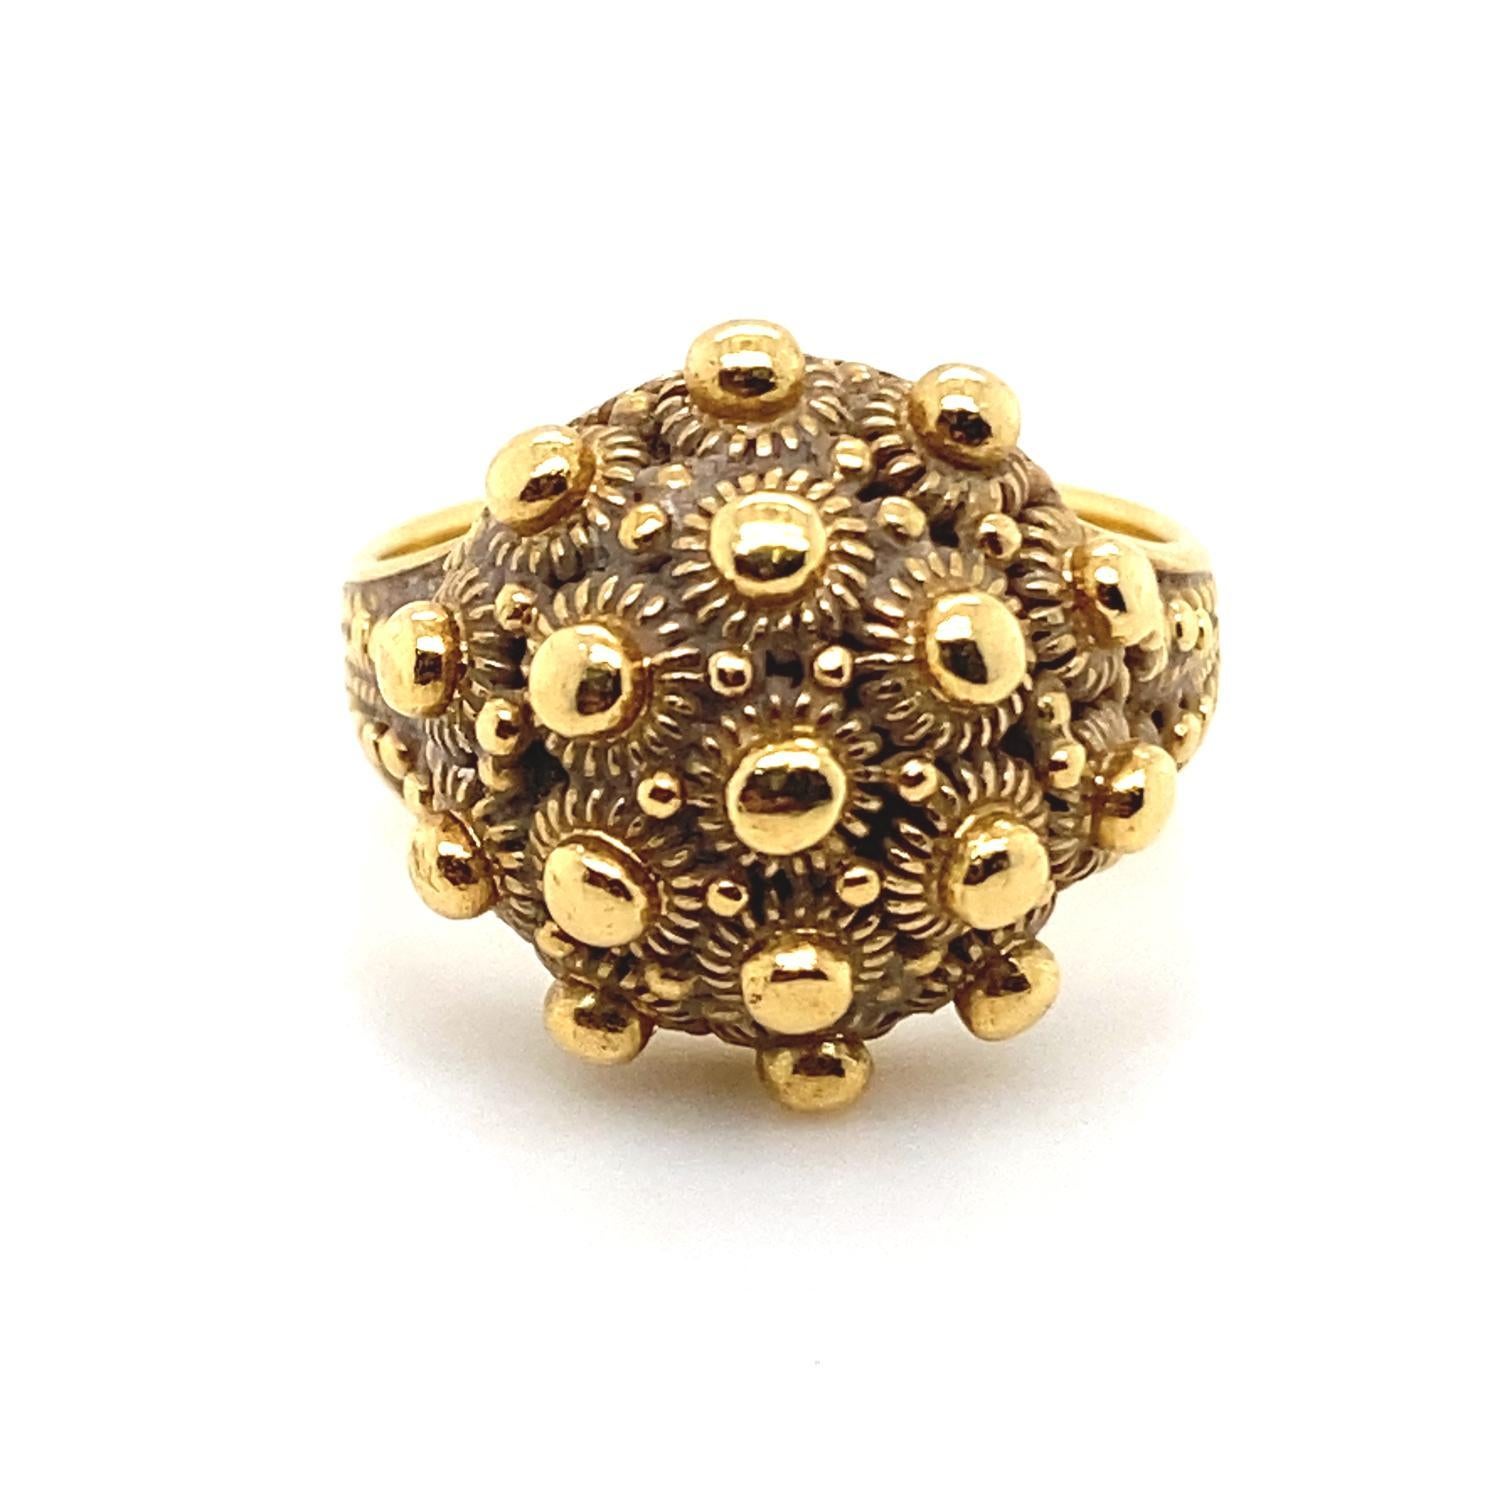 An Etruscan style 18 karat yellow gold ring

This ring features a domed circular base studded with tiny polished gold balls, leading to a tapered band, also with engraved relief detail.

The strong Etruscan Style of this ring is inspired by 19th